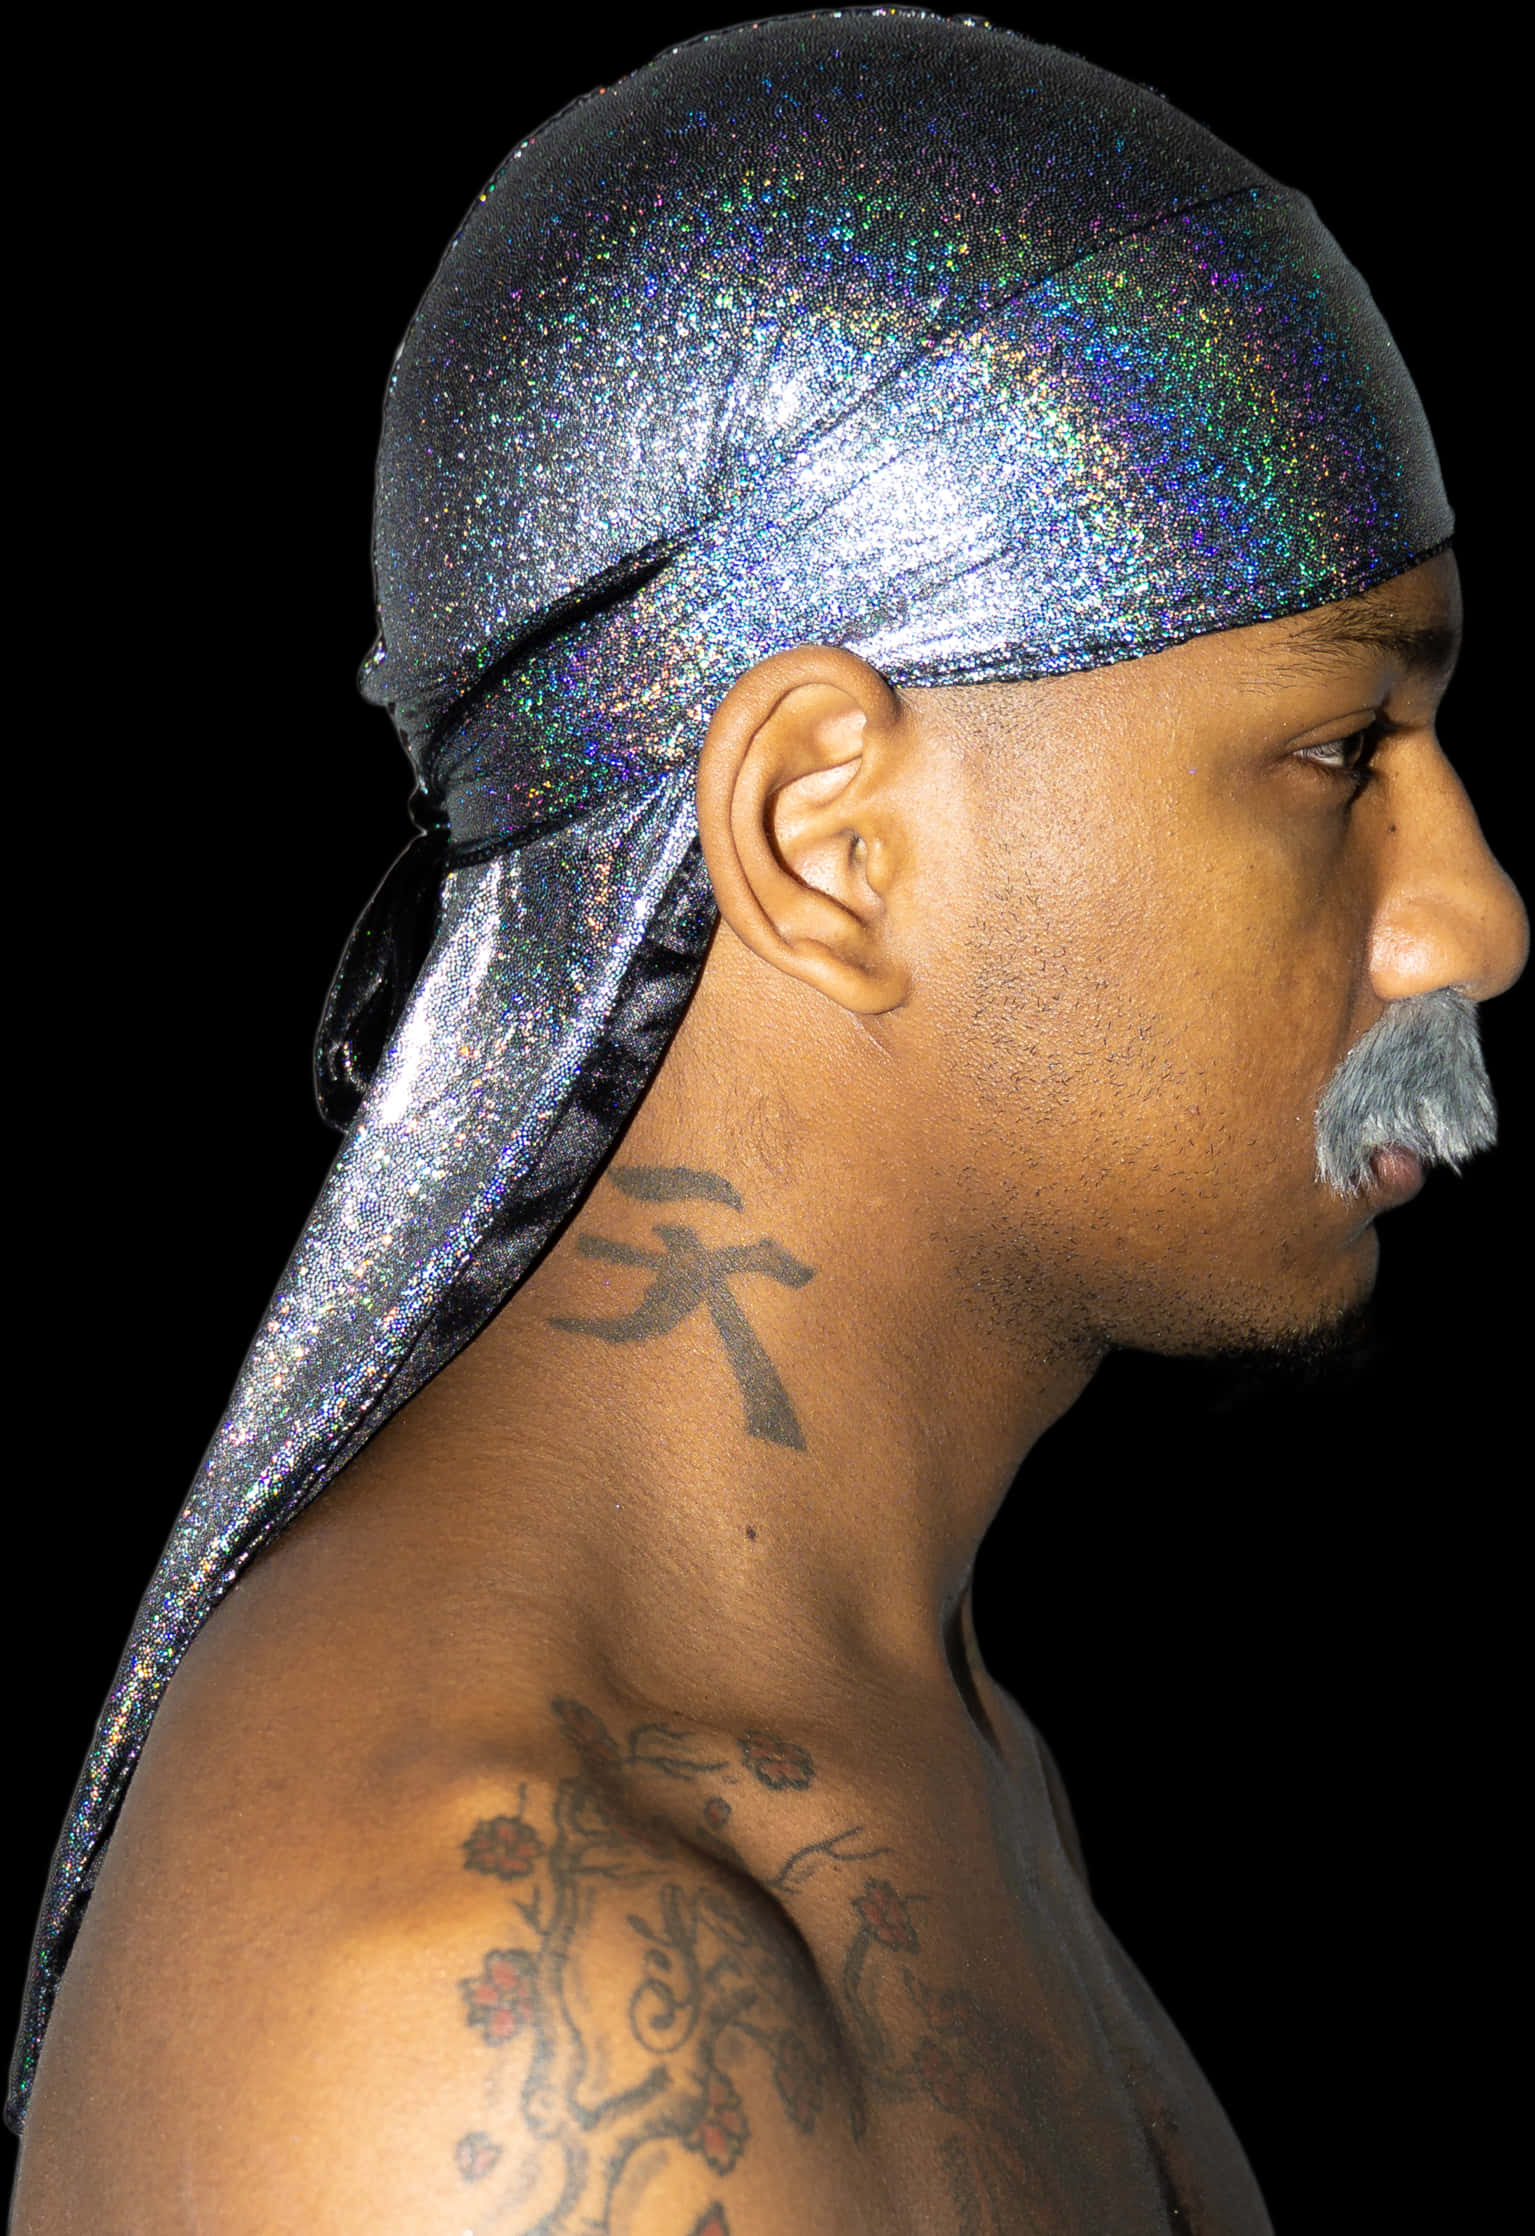 A Man With A Mustache And A Silver Head Wrap